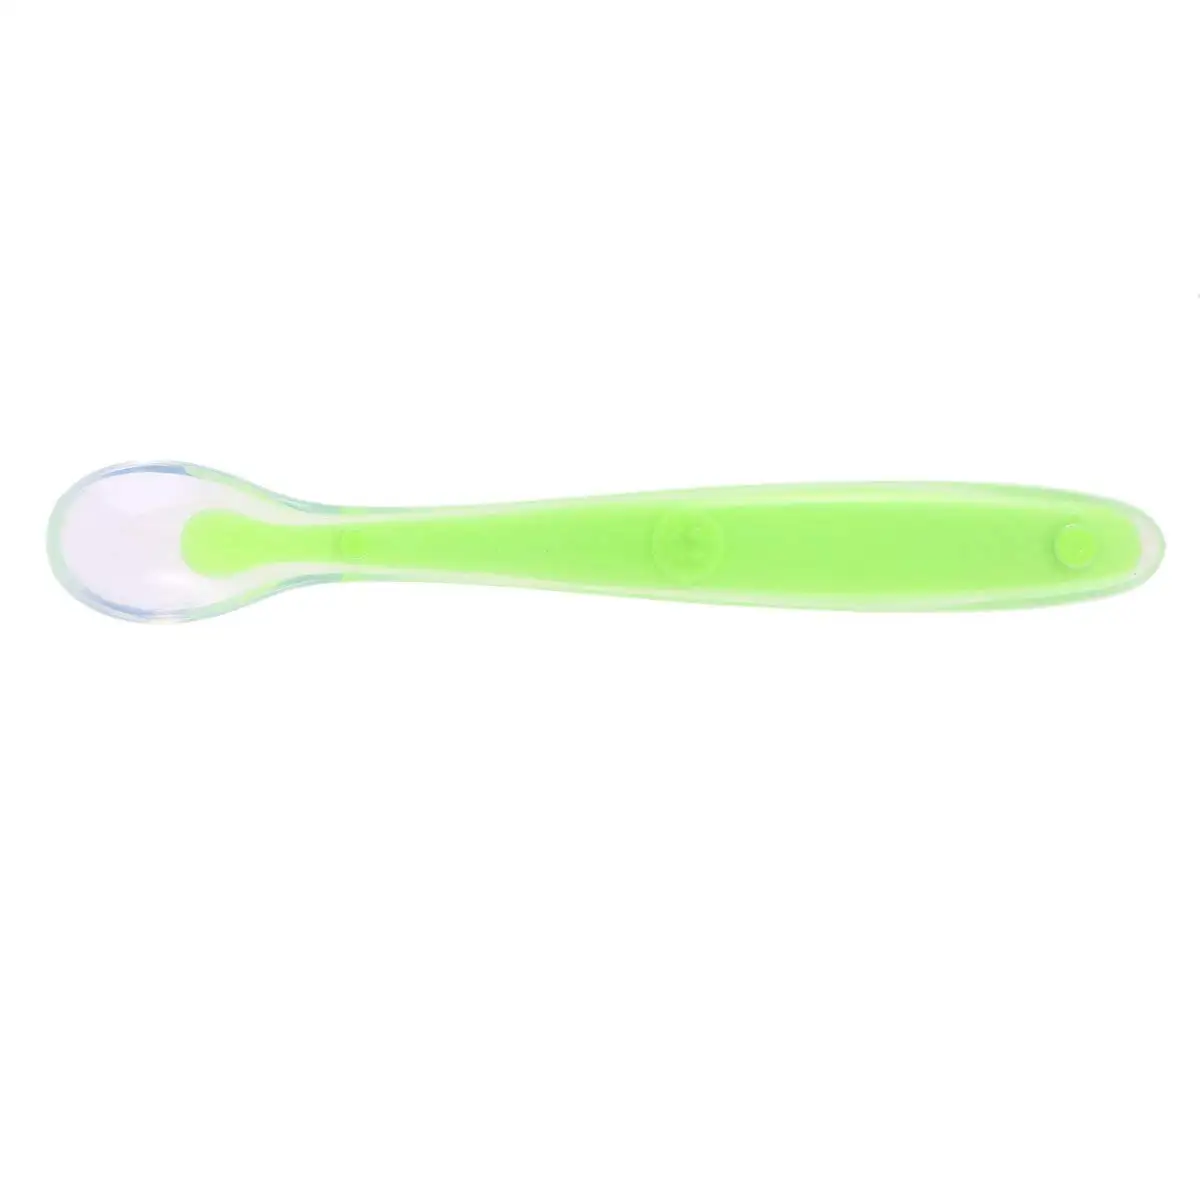 4 rubber tipped baby spoons